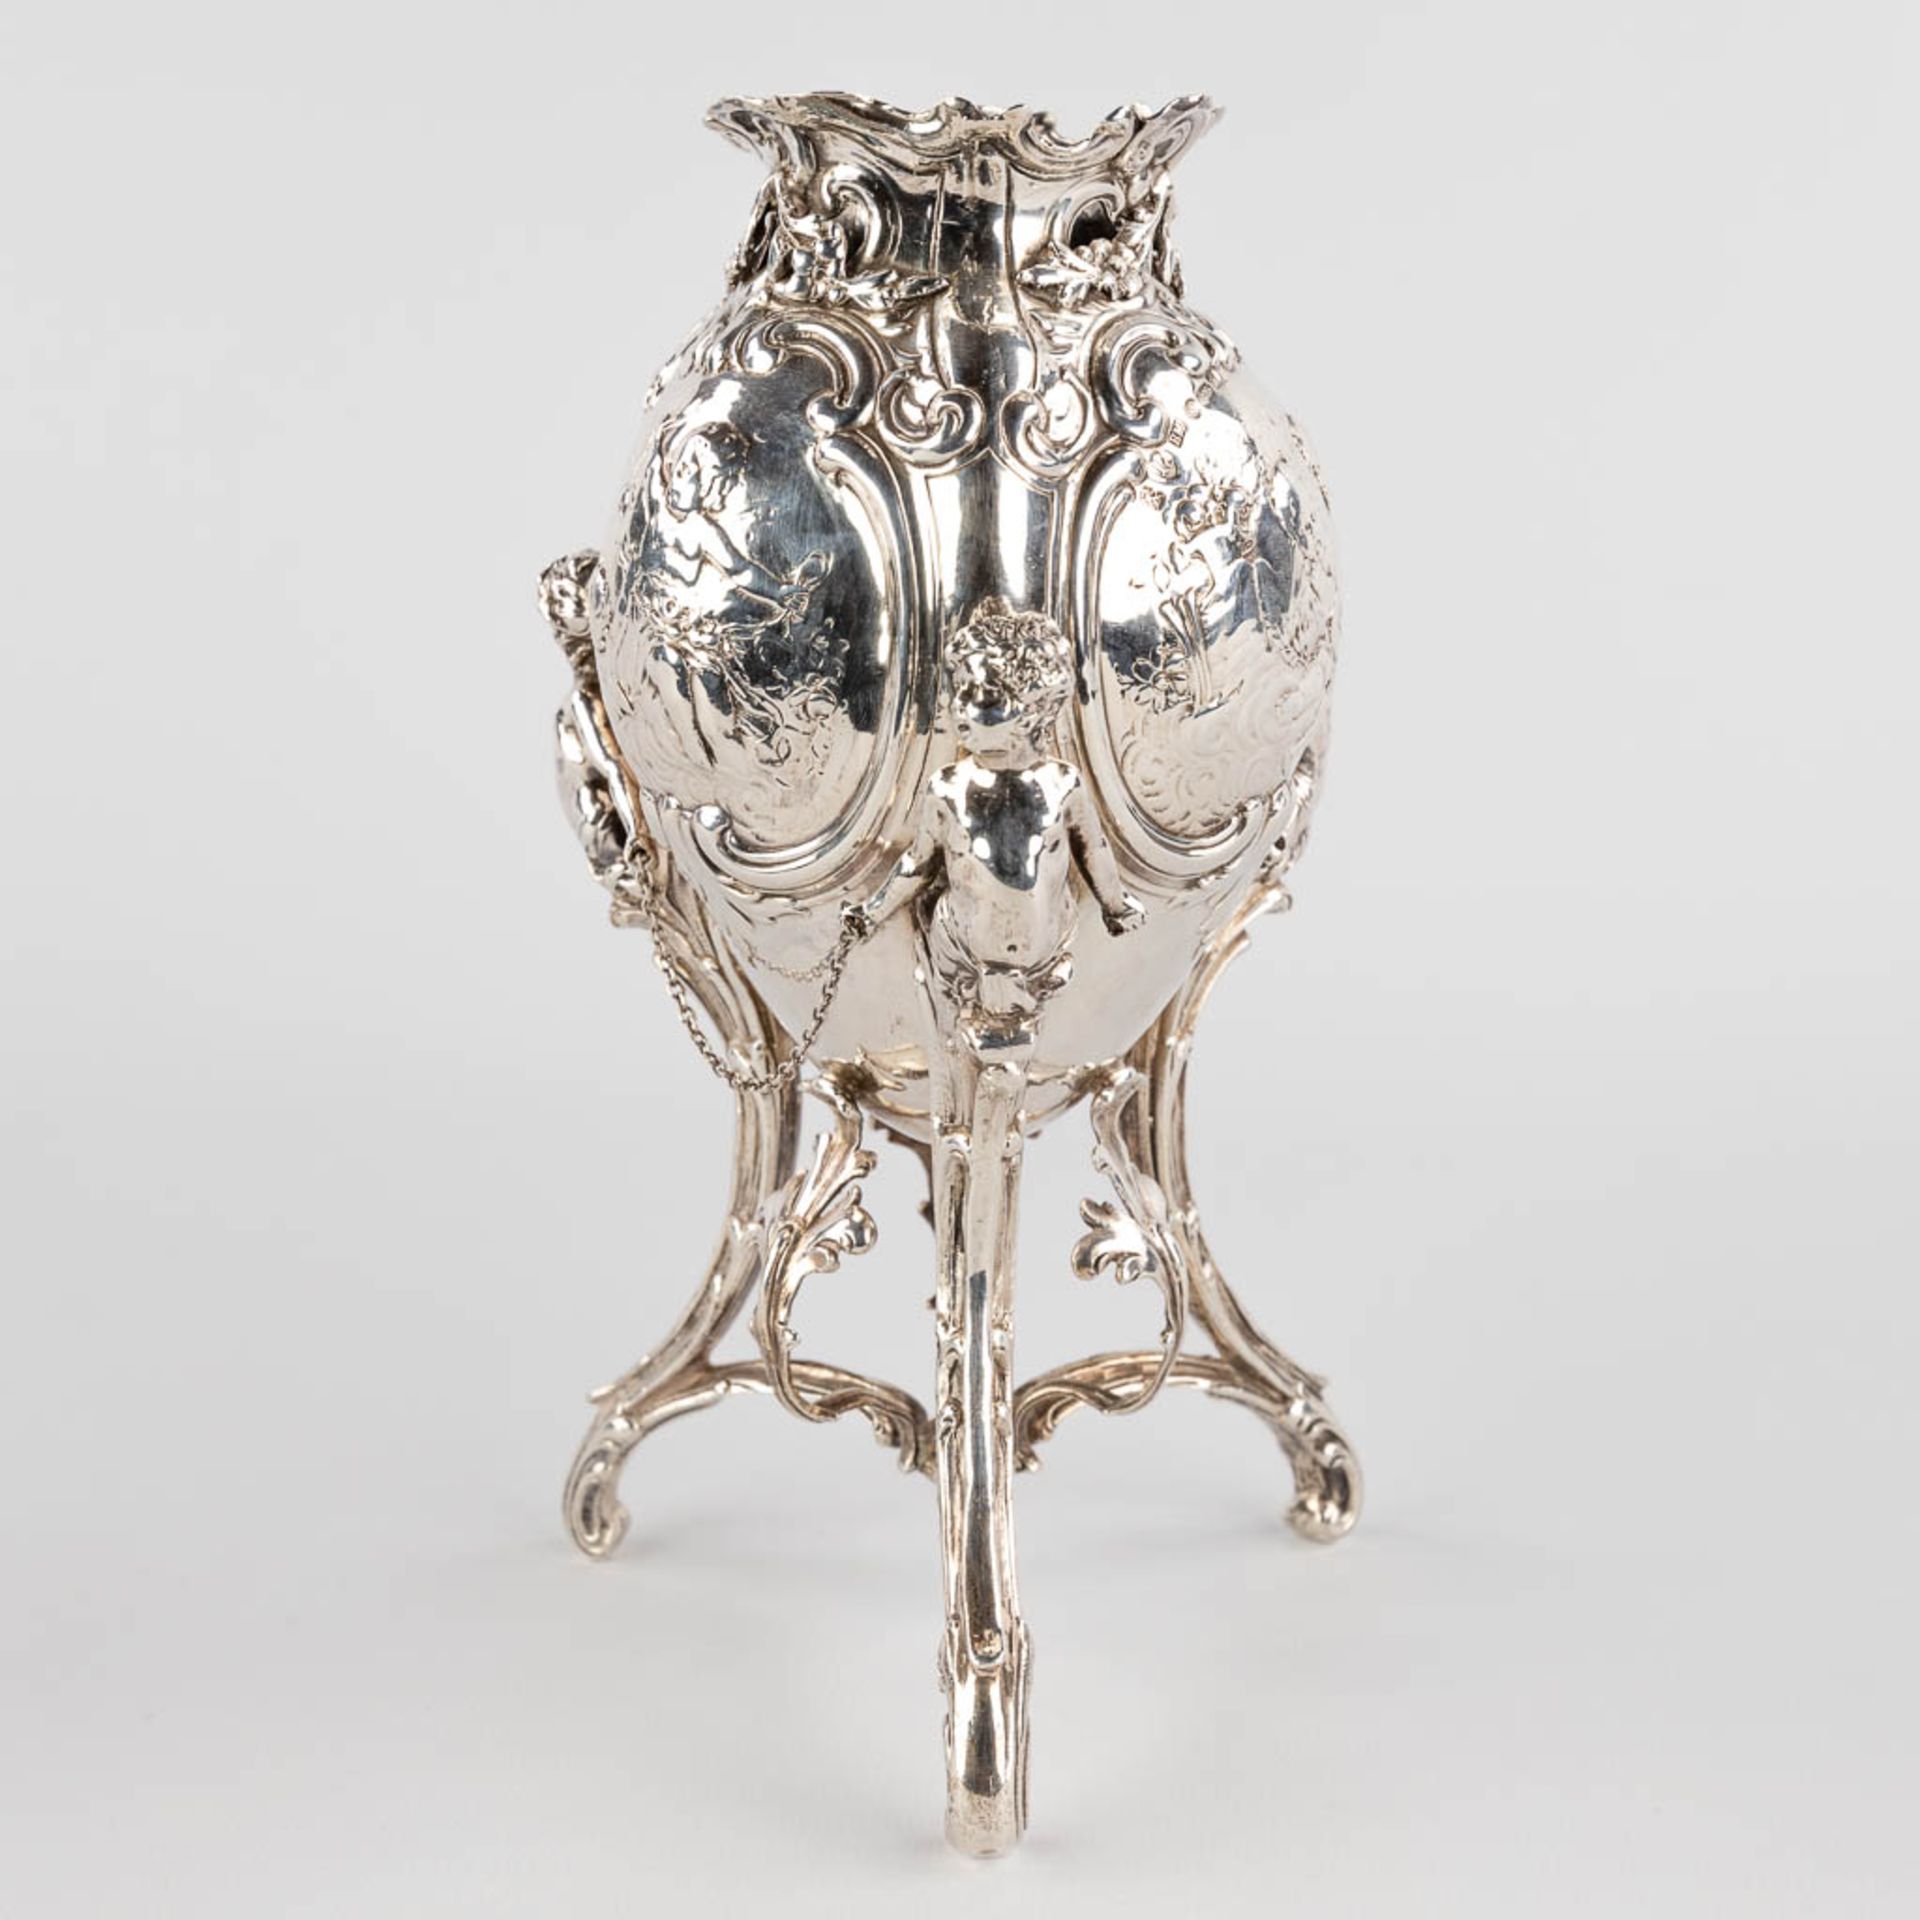 A fine vase, silver in Louis XV style, mounted with 3 putto. 427g. 1906. (D:11 x W:11 x H:20 cm) - Image 3 of 12